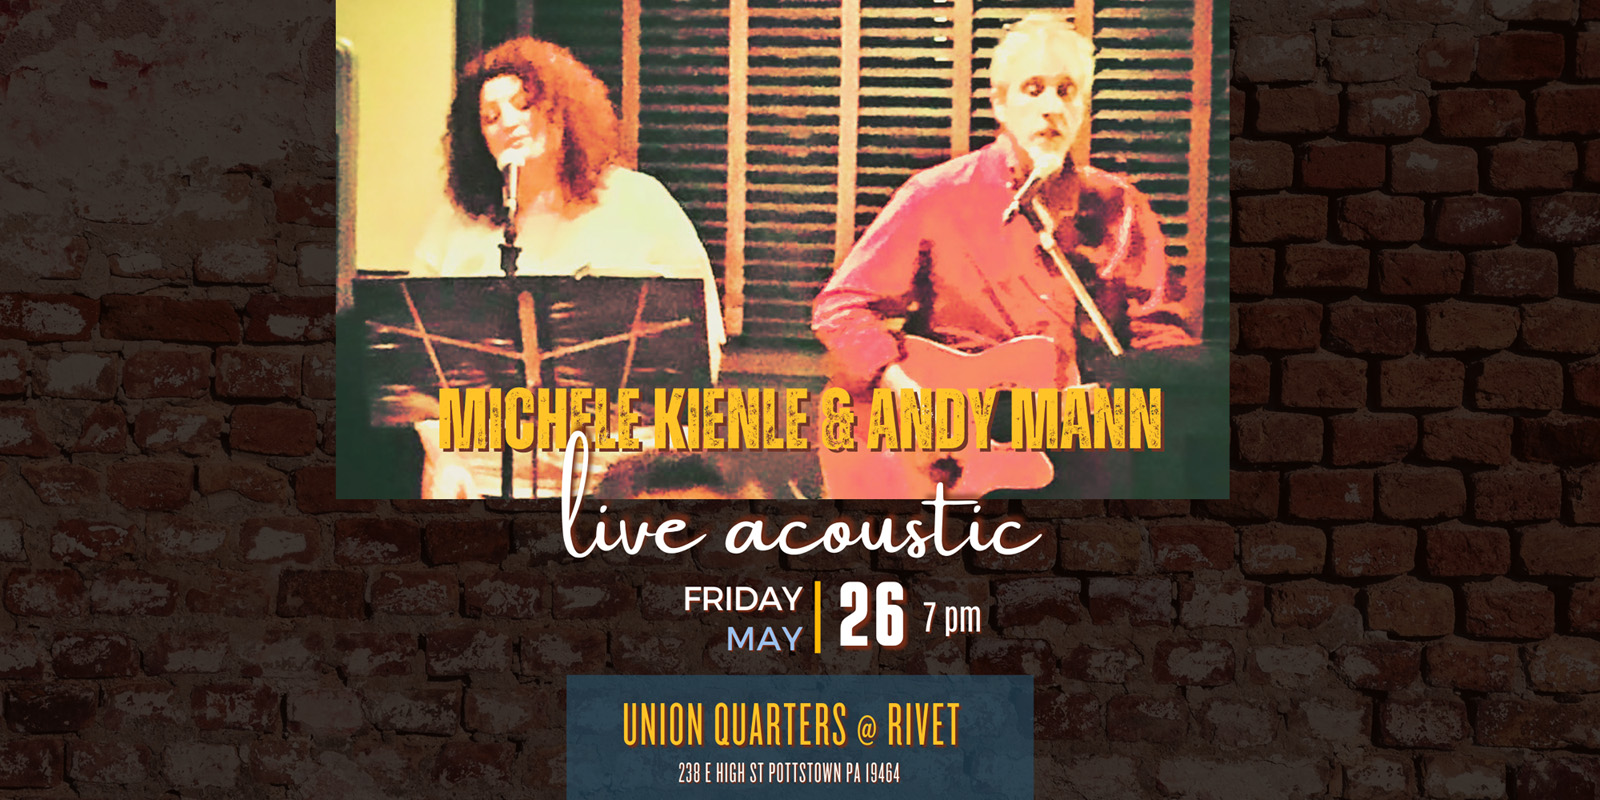 Michele Kienle & Andy Mann performing live at Rivet's Union Quarters on Friday, May 26th, 2023!